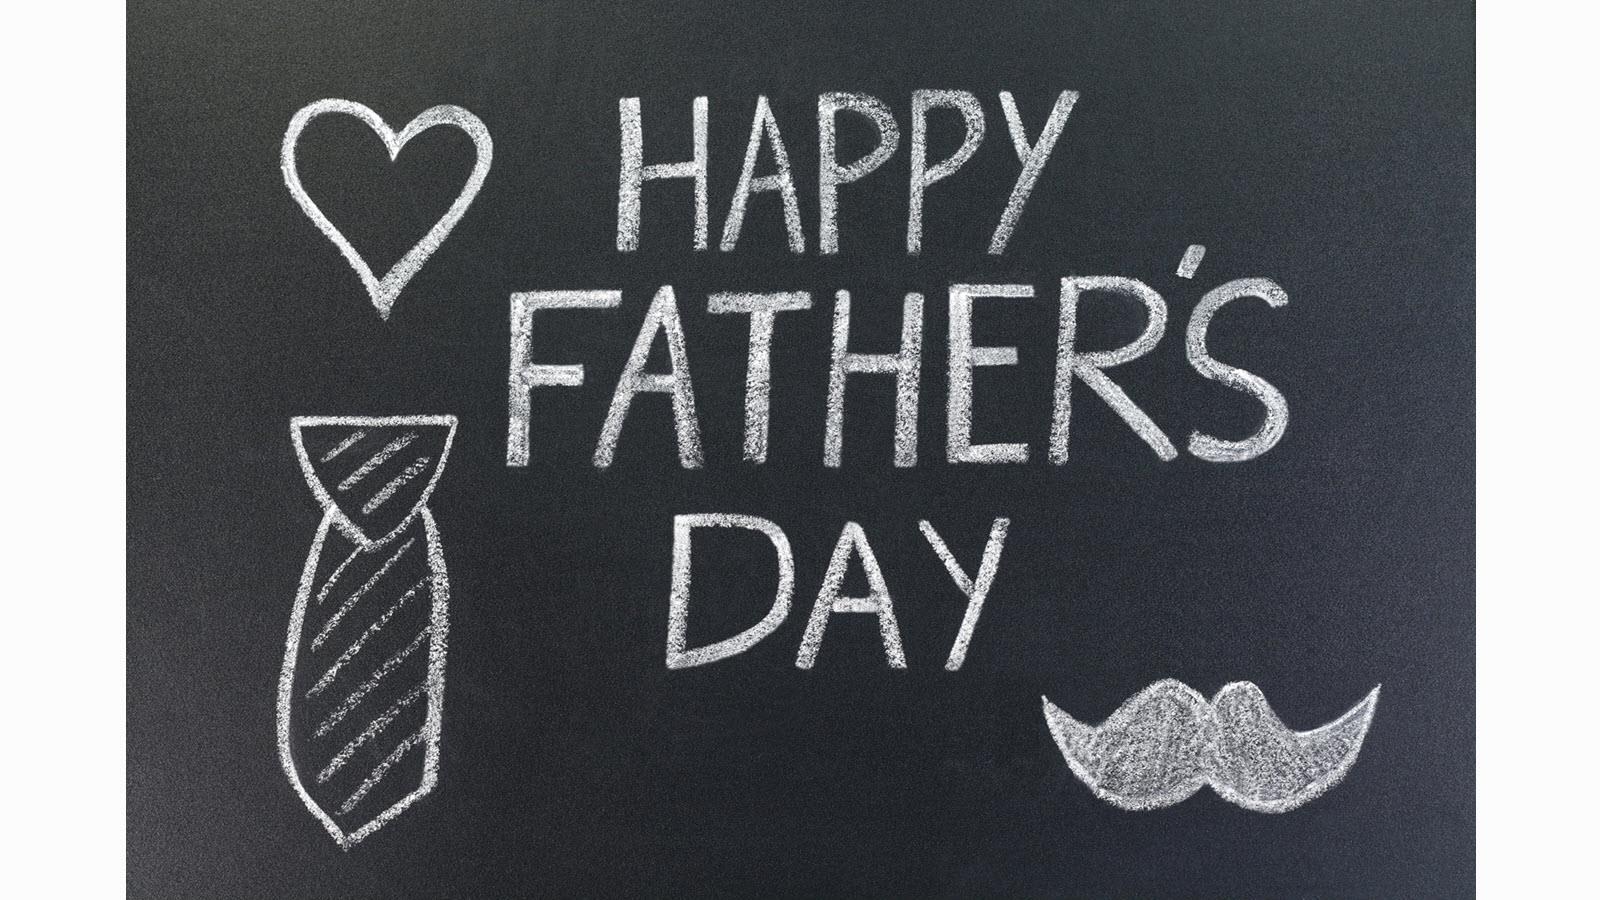 Happy Father's Day written on a chalkboard with drawings of a heart, tie and mustache